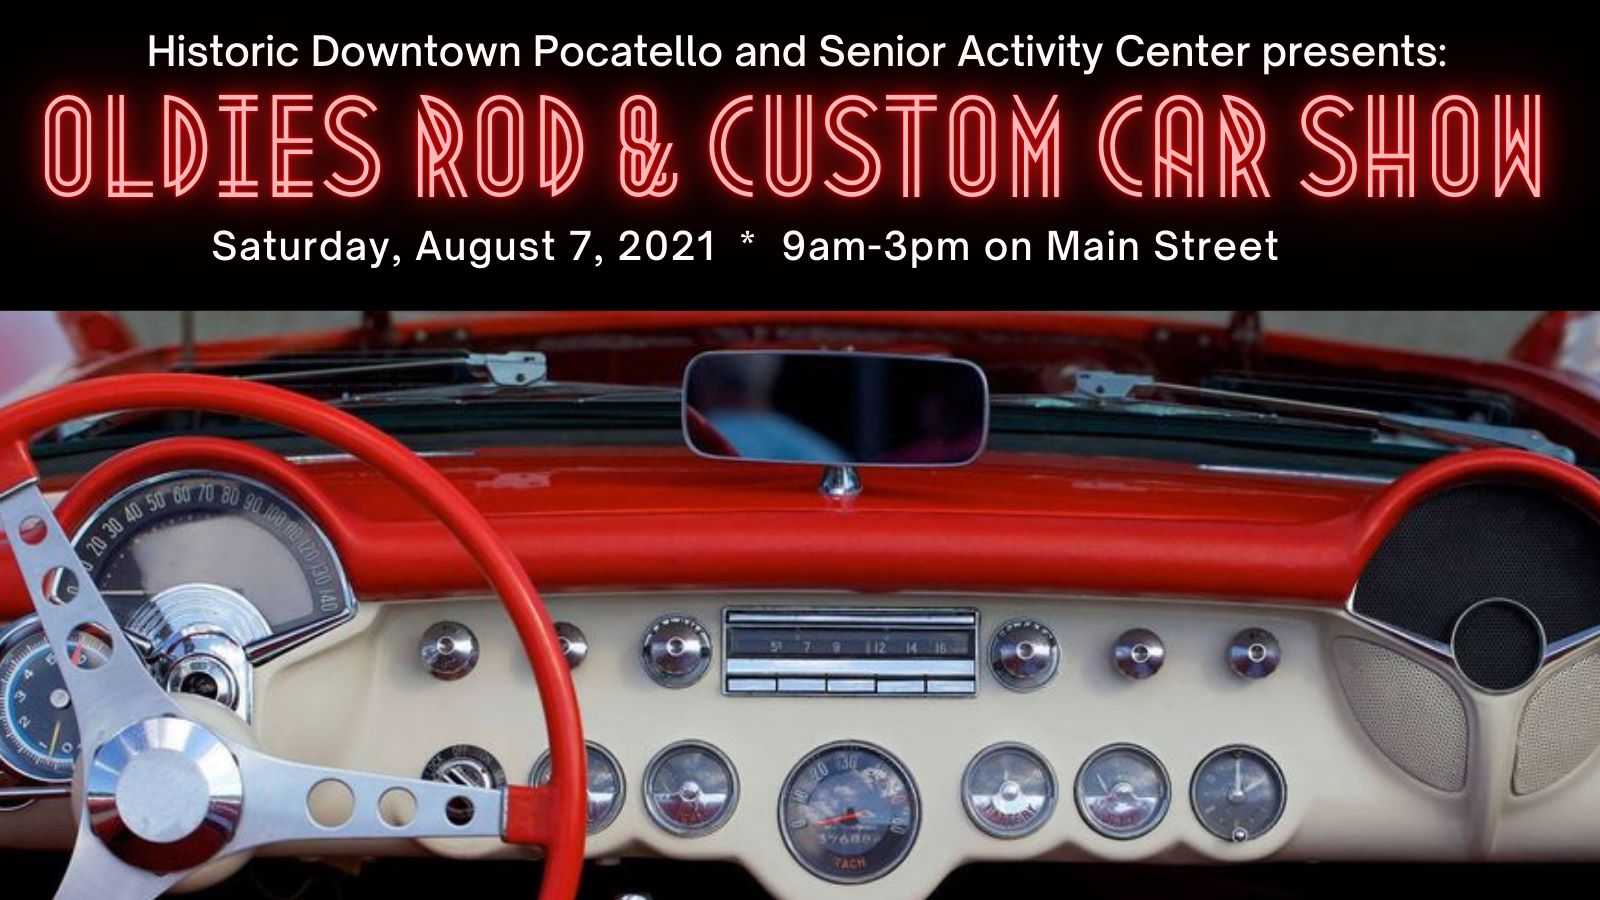 Oldies Rod & Custom Car Show, Today, Saturday, August 7 in Downtown